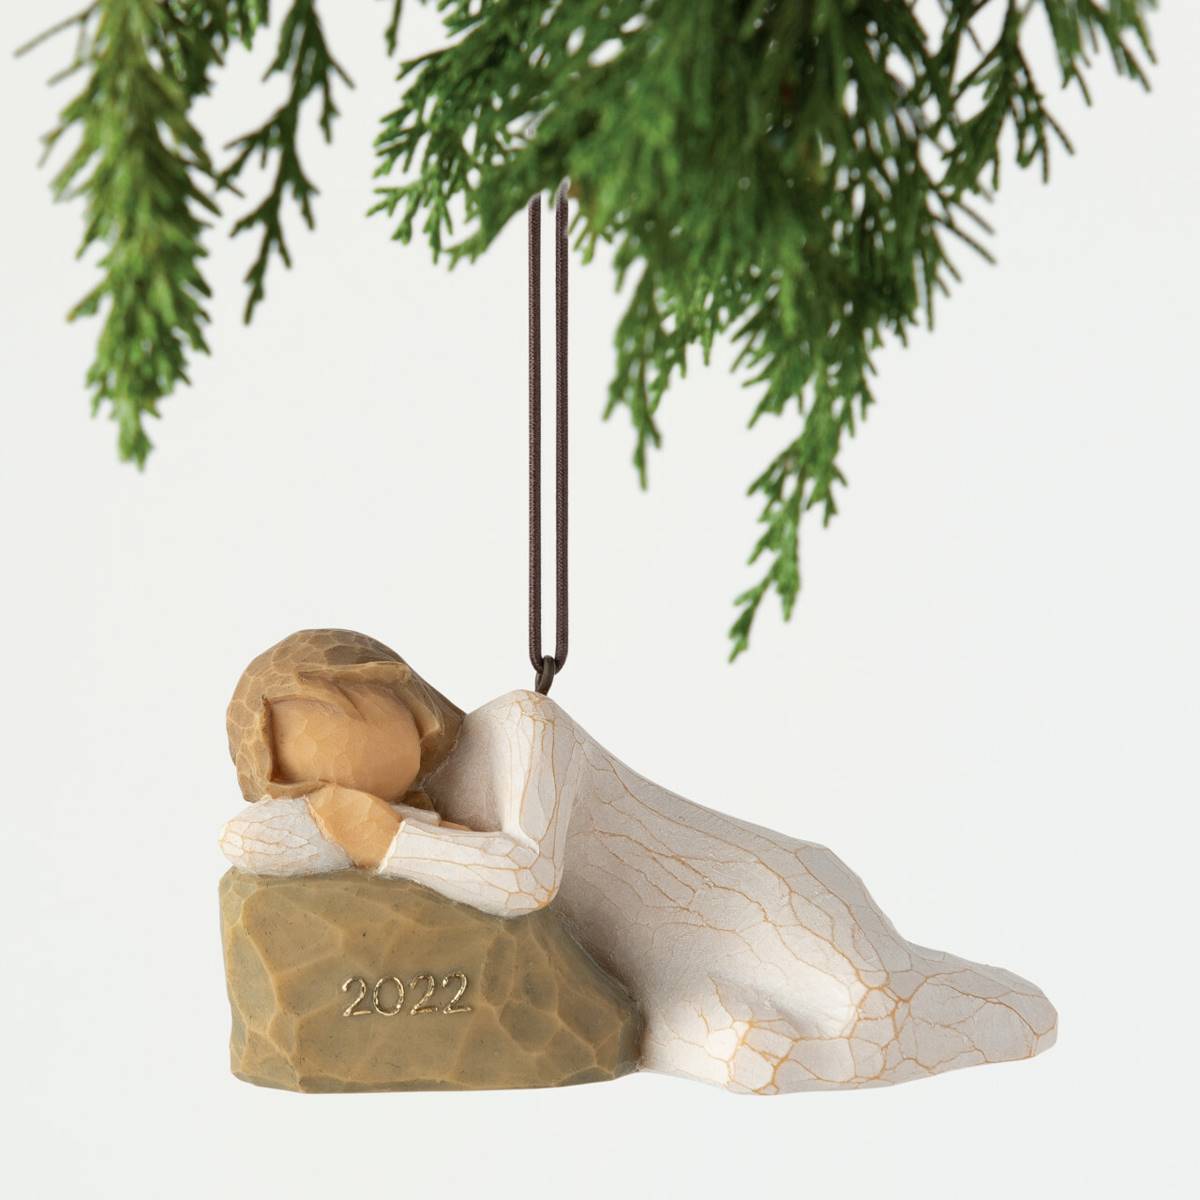 Willow Tree 2022 Wishes & Dreams Ornament